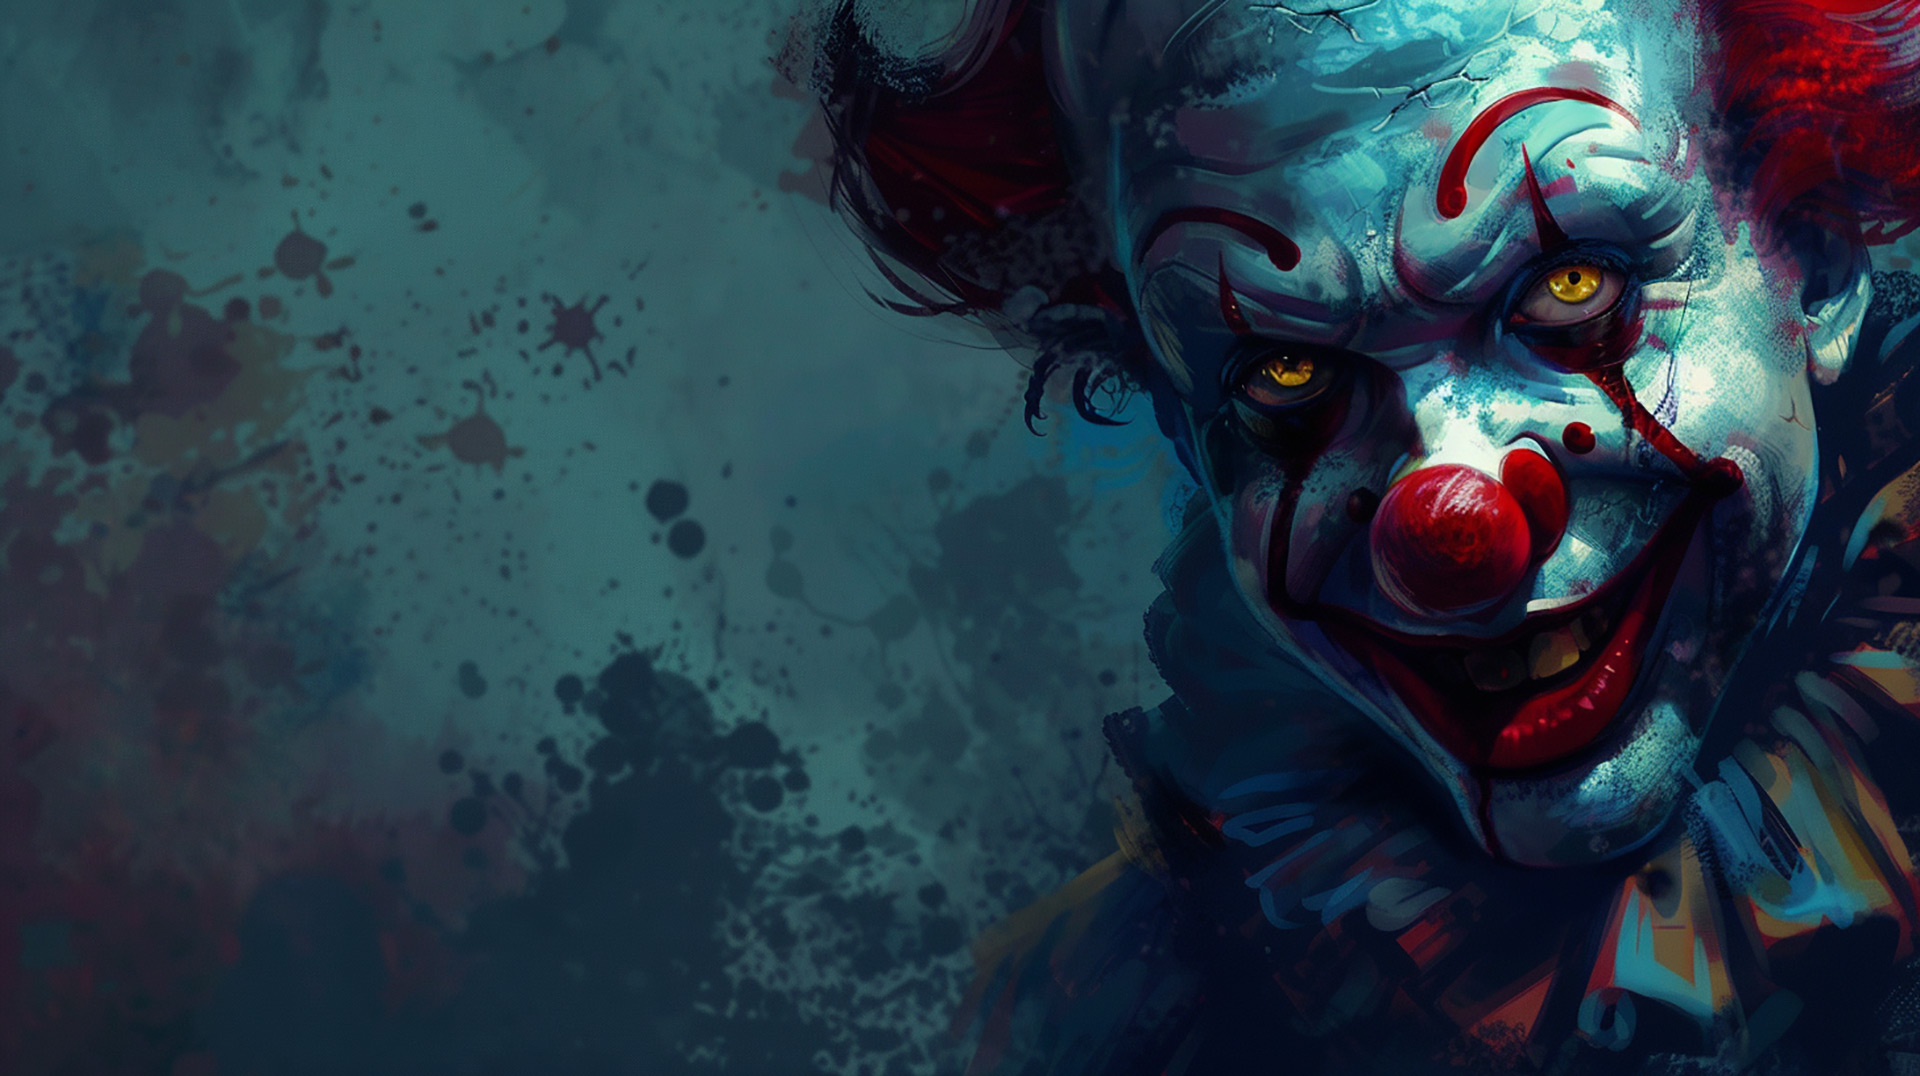 Sinister Creepy Clown Digital Background: Free Download